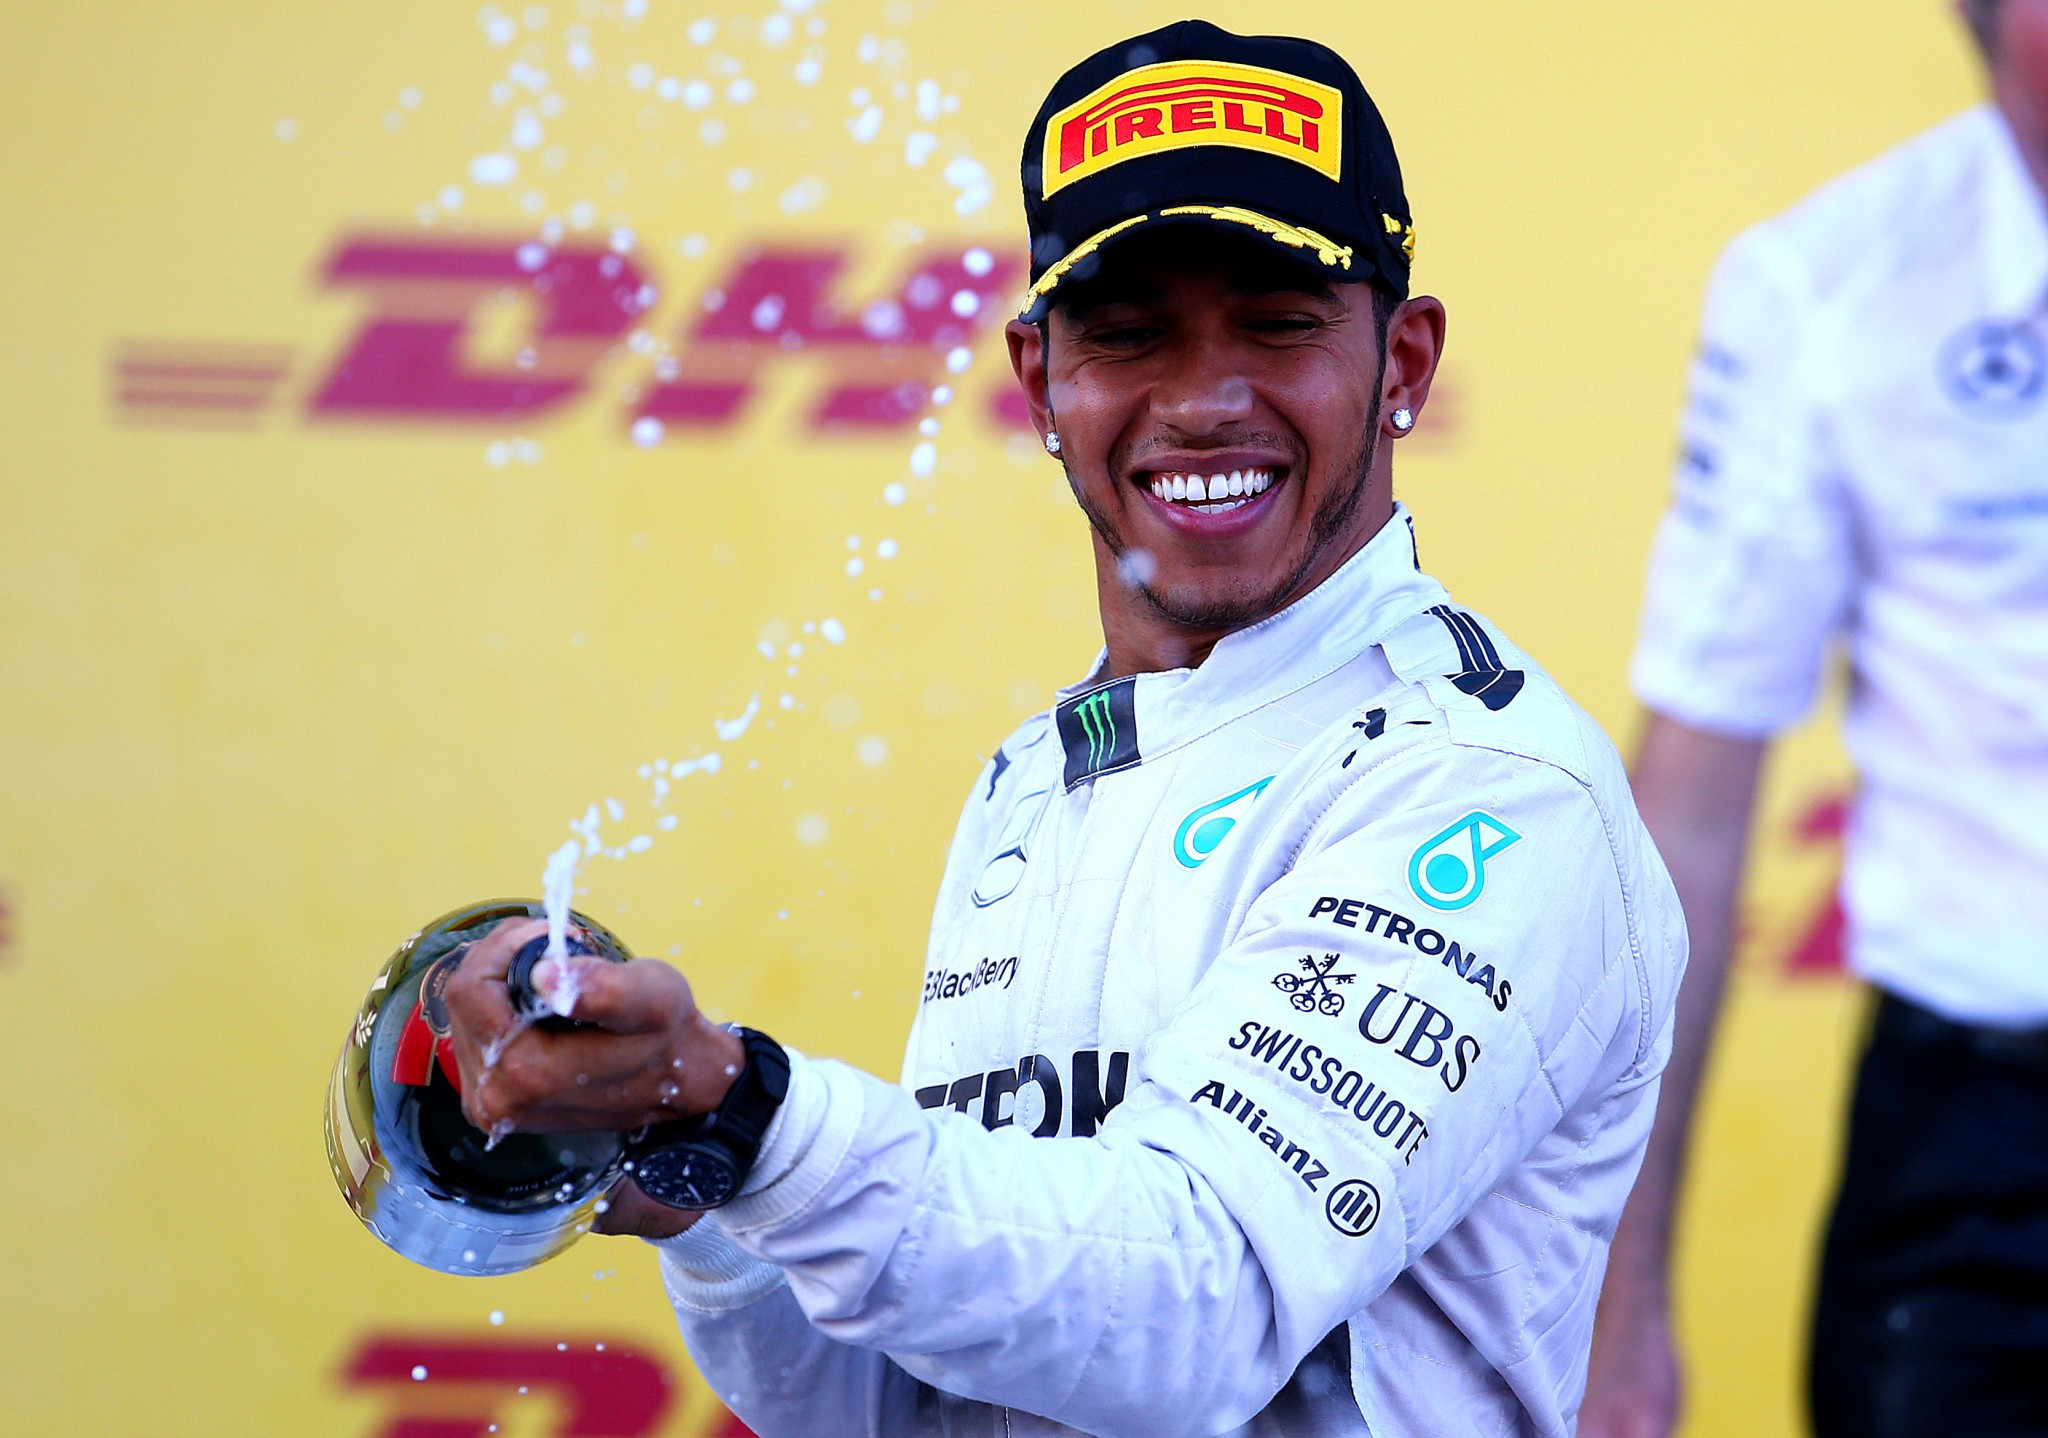 Lewis Hamilton may have secured a fourth Formula One world title but his popularity could be hit by recent tax avoidance revelations in Britain ©Getty Images